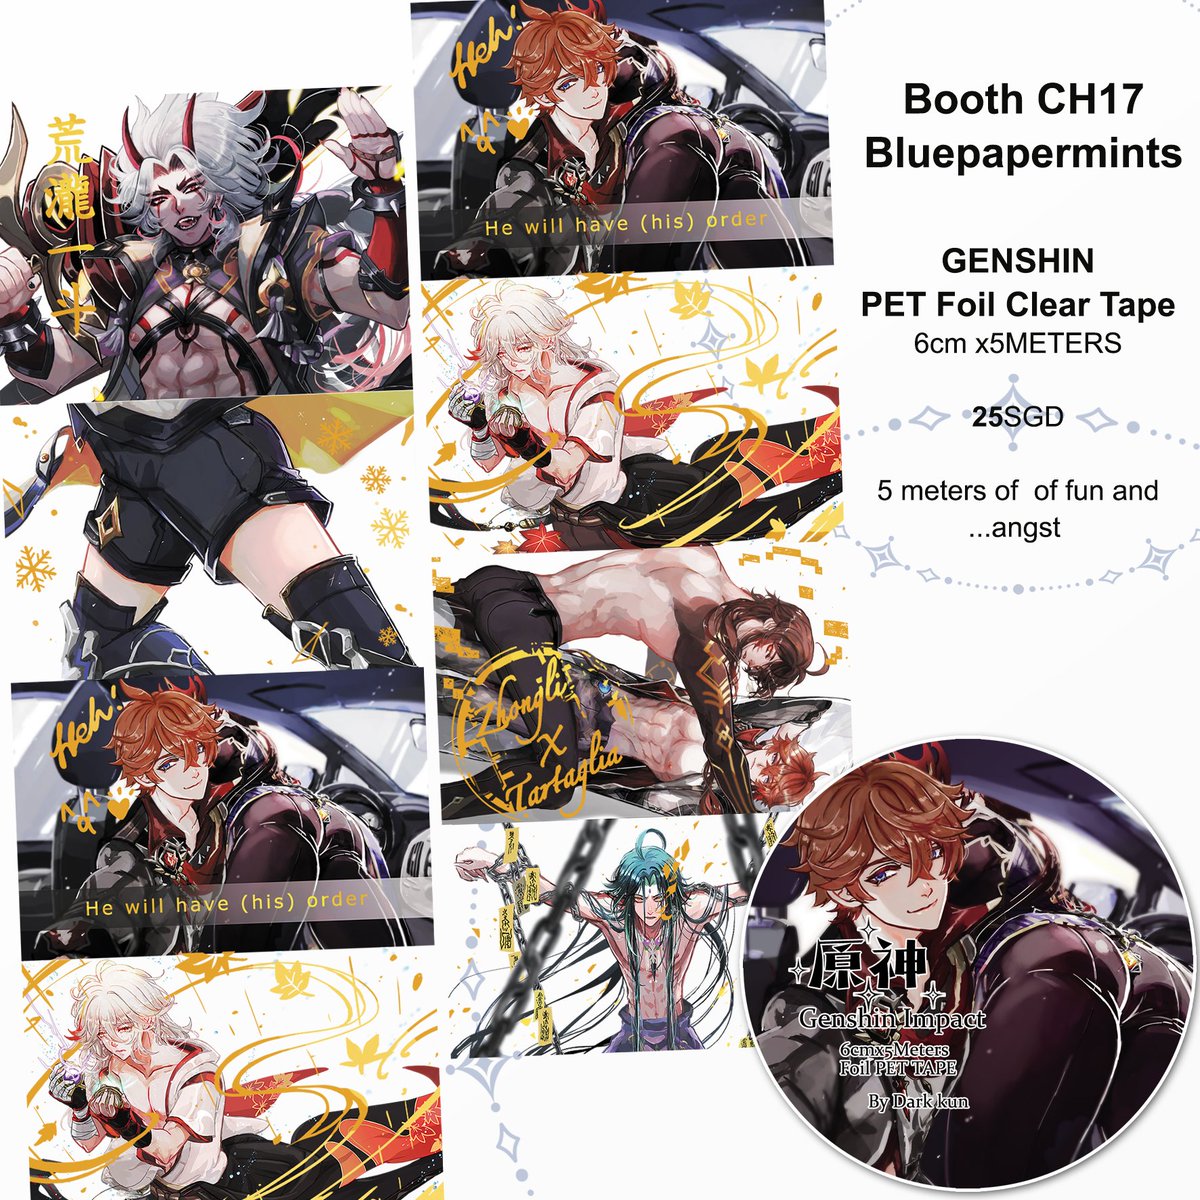 AFASG catalogue part 4

I will bringing 30 of the Genshin fancomics over!
Yes, they will be available during Comic Fiesta as well.

Zhongli standee is AFA exclusive, as got space to display it w/o causing trouble to my booth neighbours w.

#AFASG2022 #AFASG #GENSHIN #Genshinlmpac 